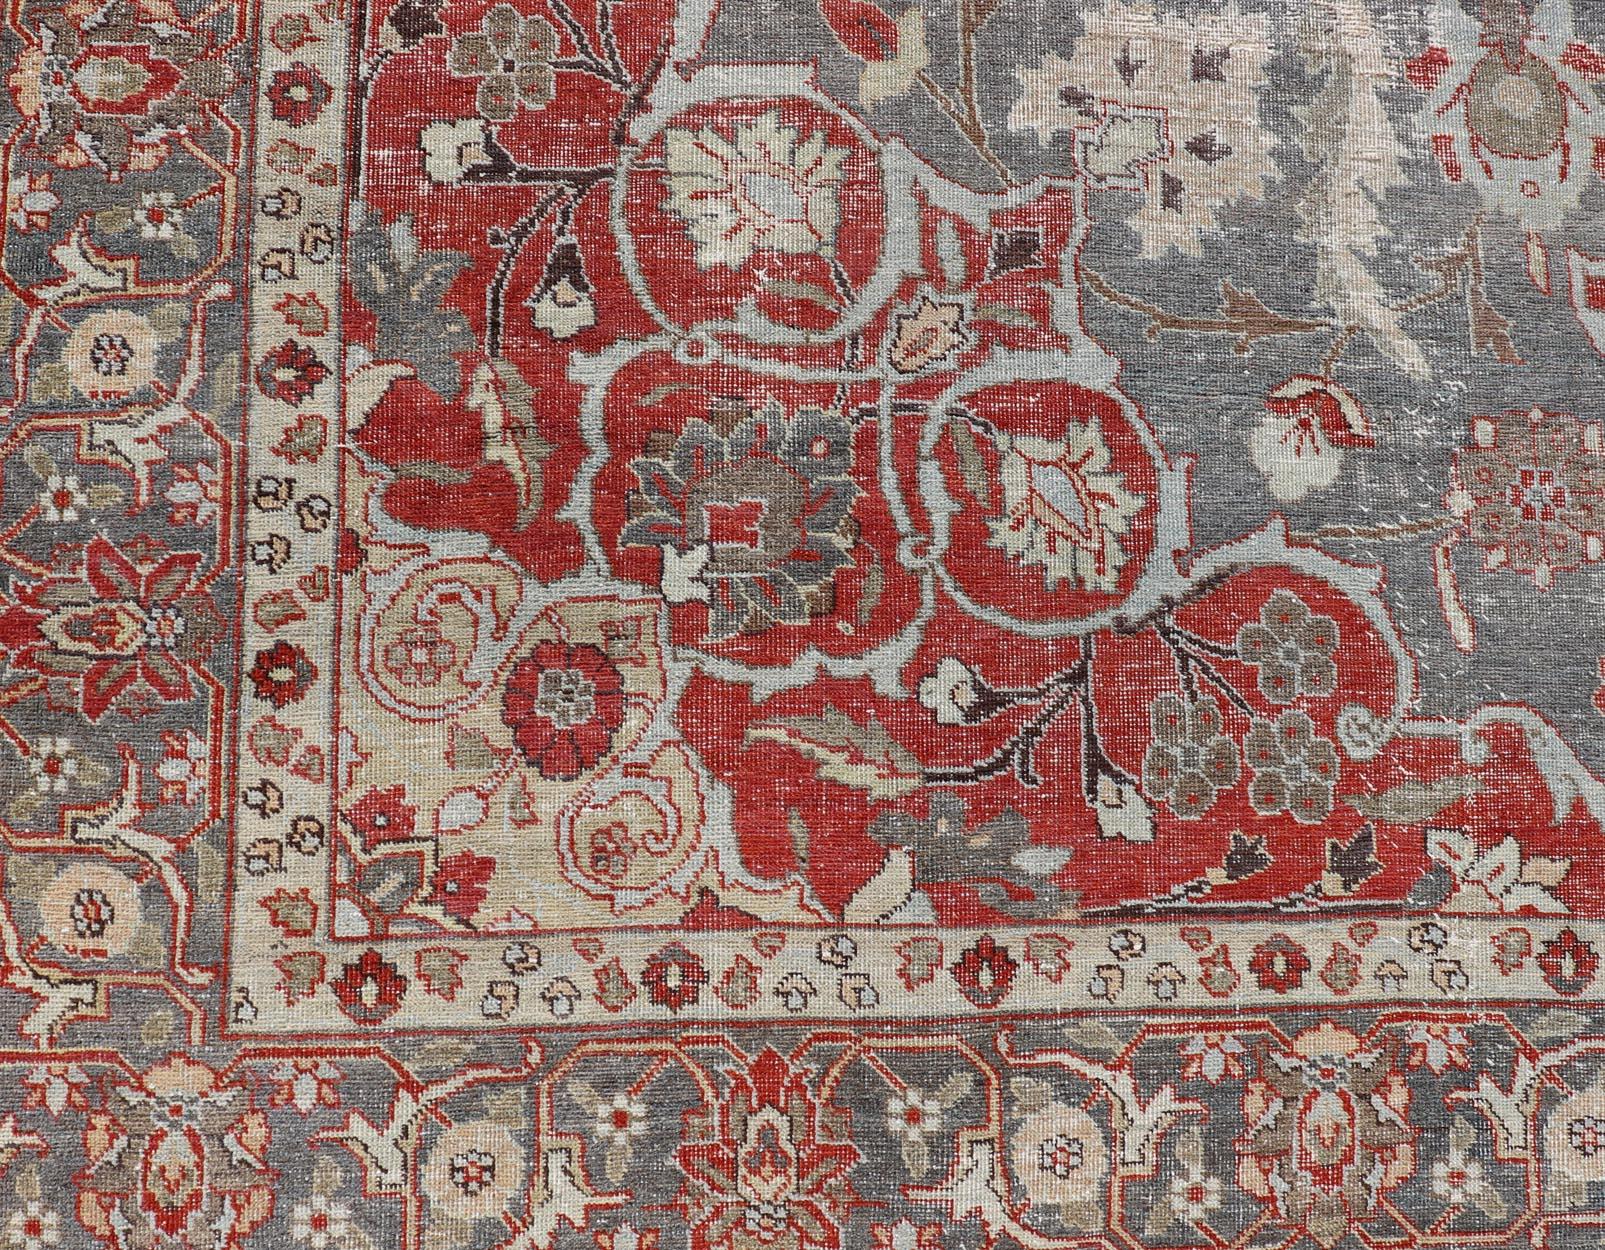 Antique Persian Tabriz Rug with Floral Medallion Design in Tan, Red, and Lt Blue For Sale 4